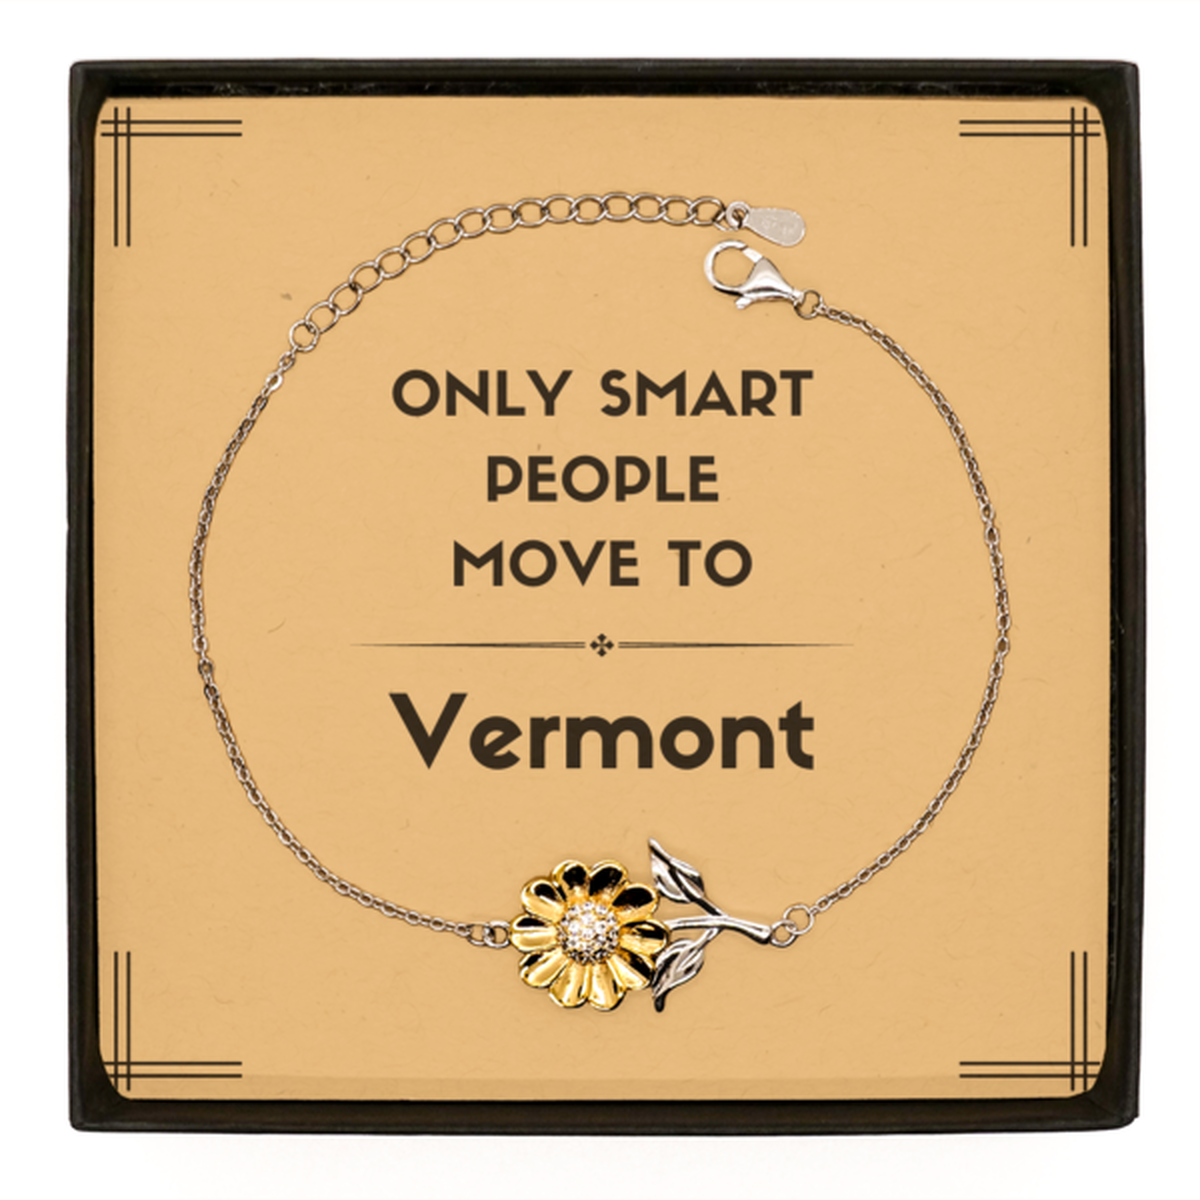 Only smart people move to Vermont Sunflower Bracelet, Message Card Gifts For Vermont, Move to Vermont Gifts for Friends Coworker Funny Saying Quote